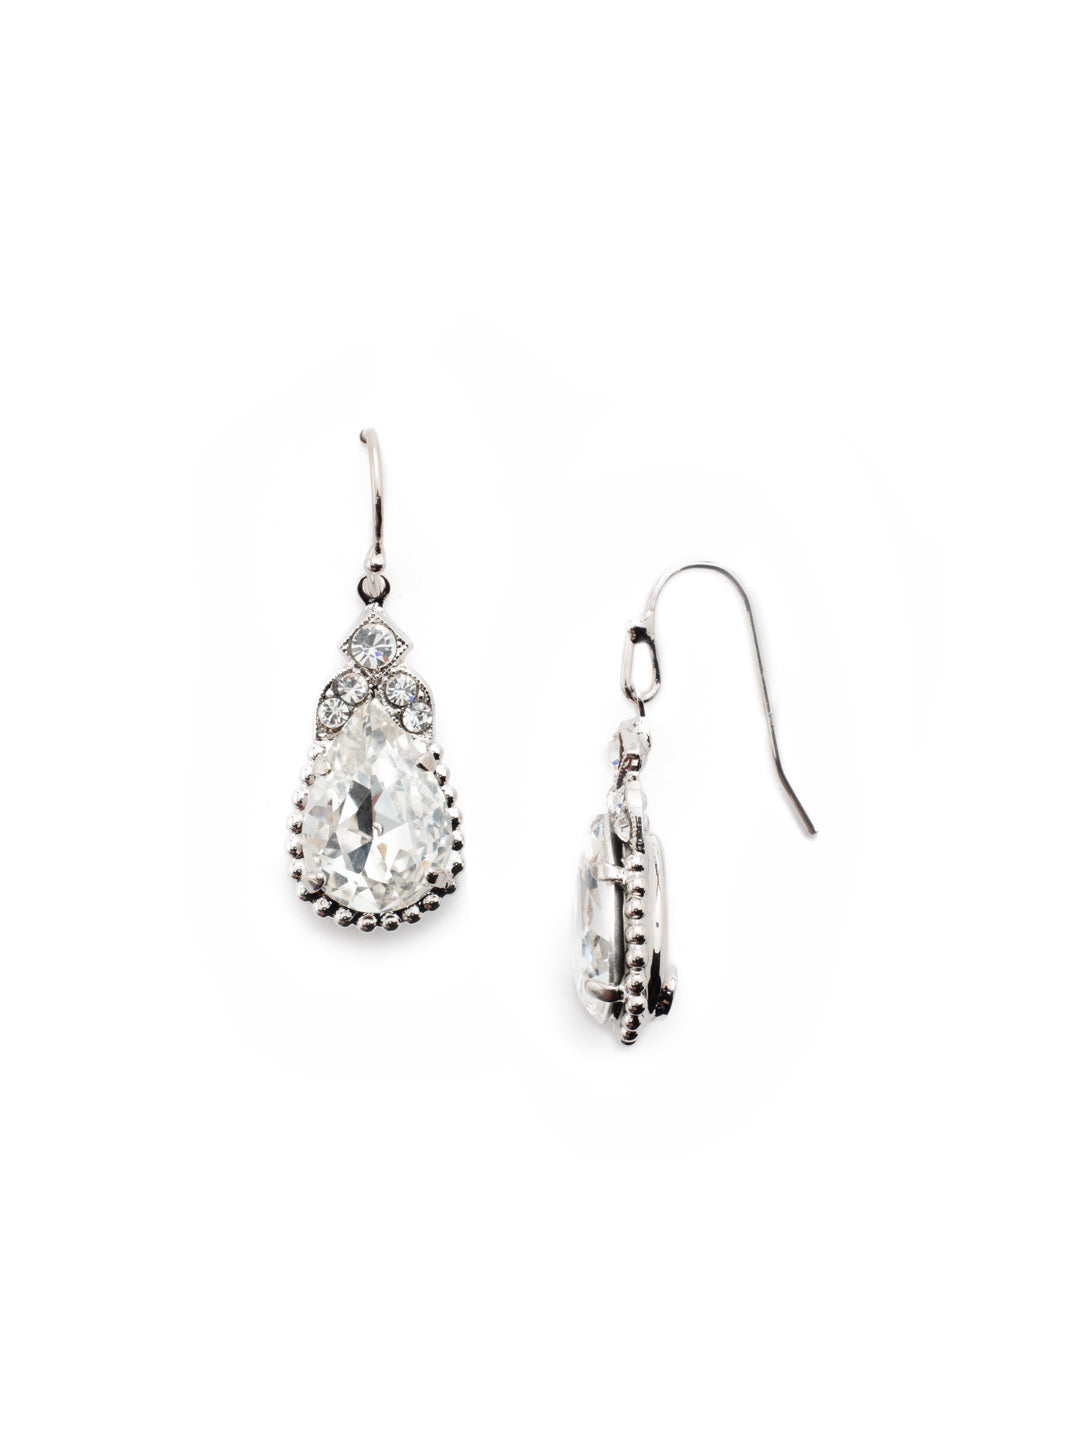 Decorative Deco Dangle Earrings - EDP22RHCRY - <p>A embellished pear cut crystal sits beneath a deco-inspired design for a dazzling look that works for any occasion. From Sorrelli's Crystal collection in our Palladium Silver-tone finish.</p>